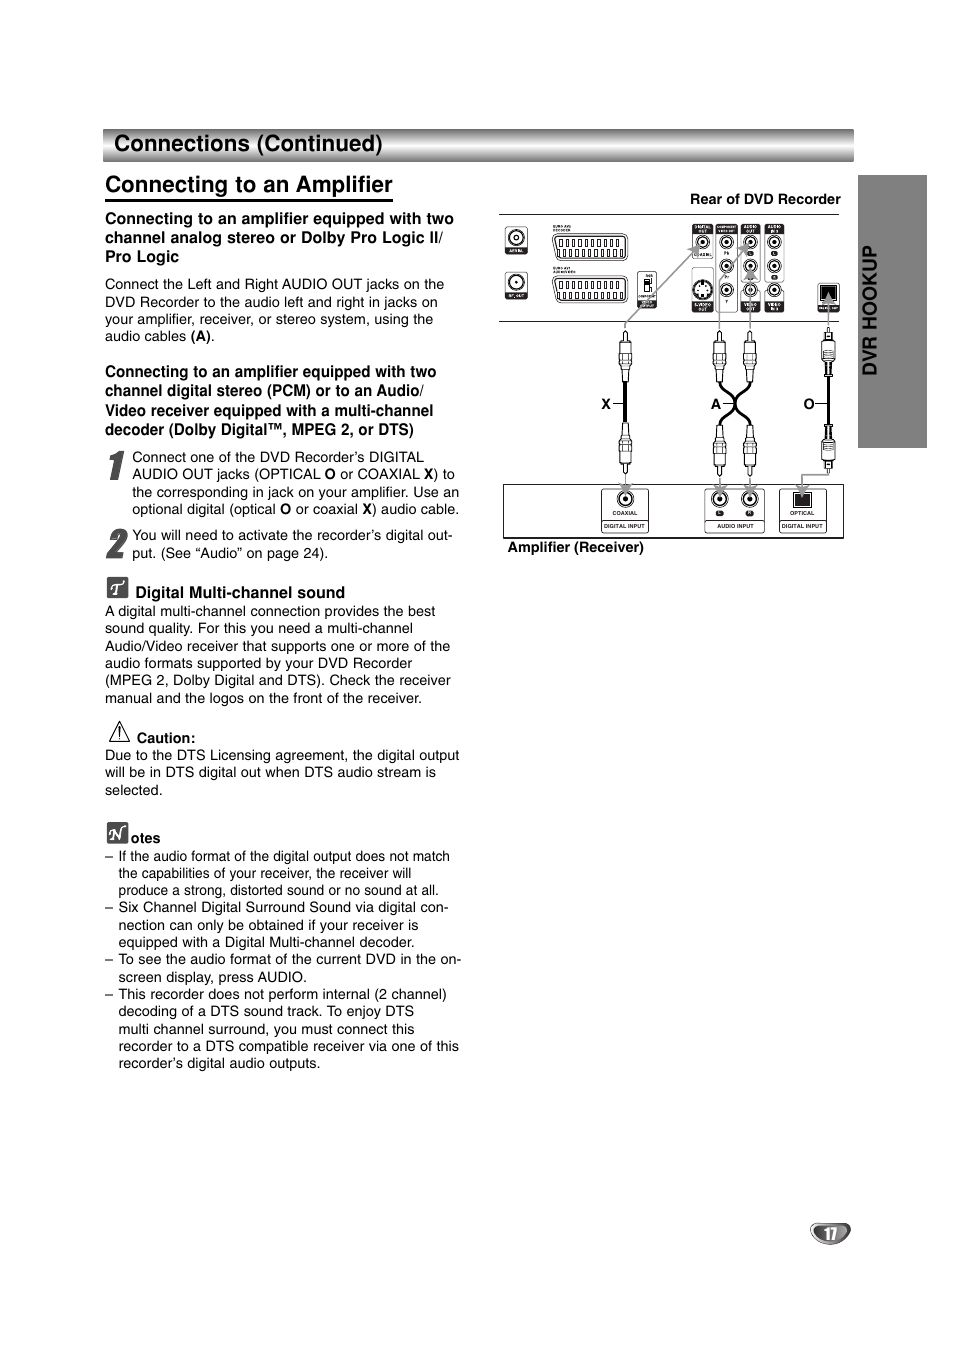 Connections (continued) connecting to an amplifier, Dvr hookup | LG DR4912 User Manual | Page 17 / 64